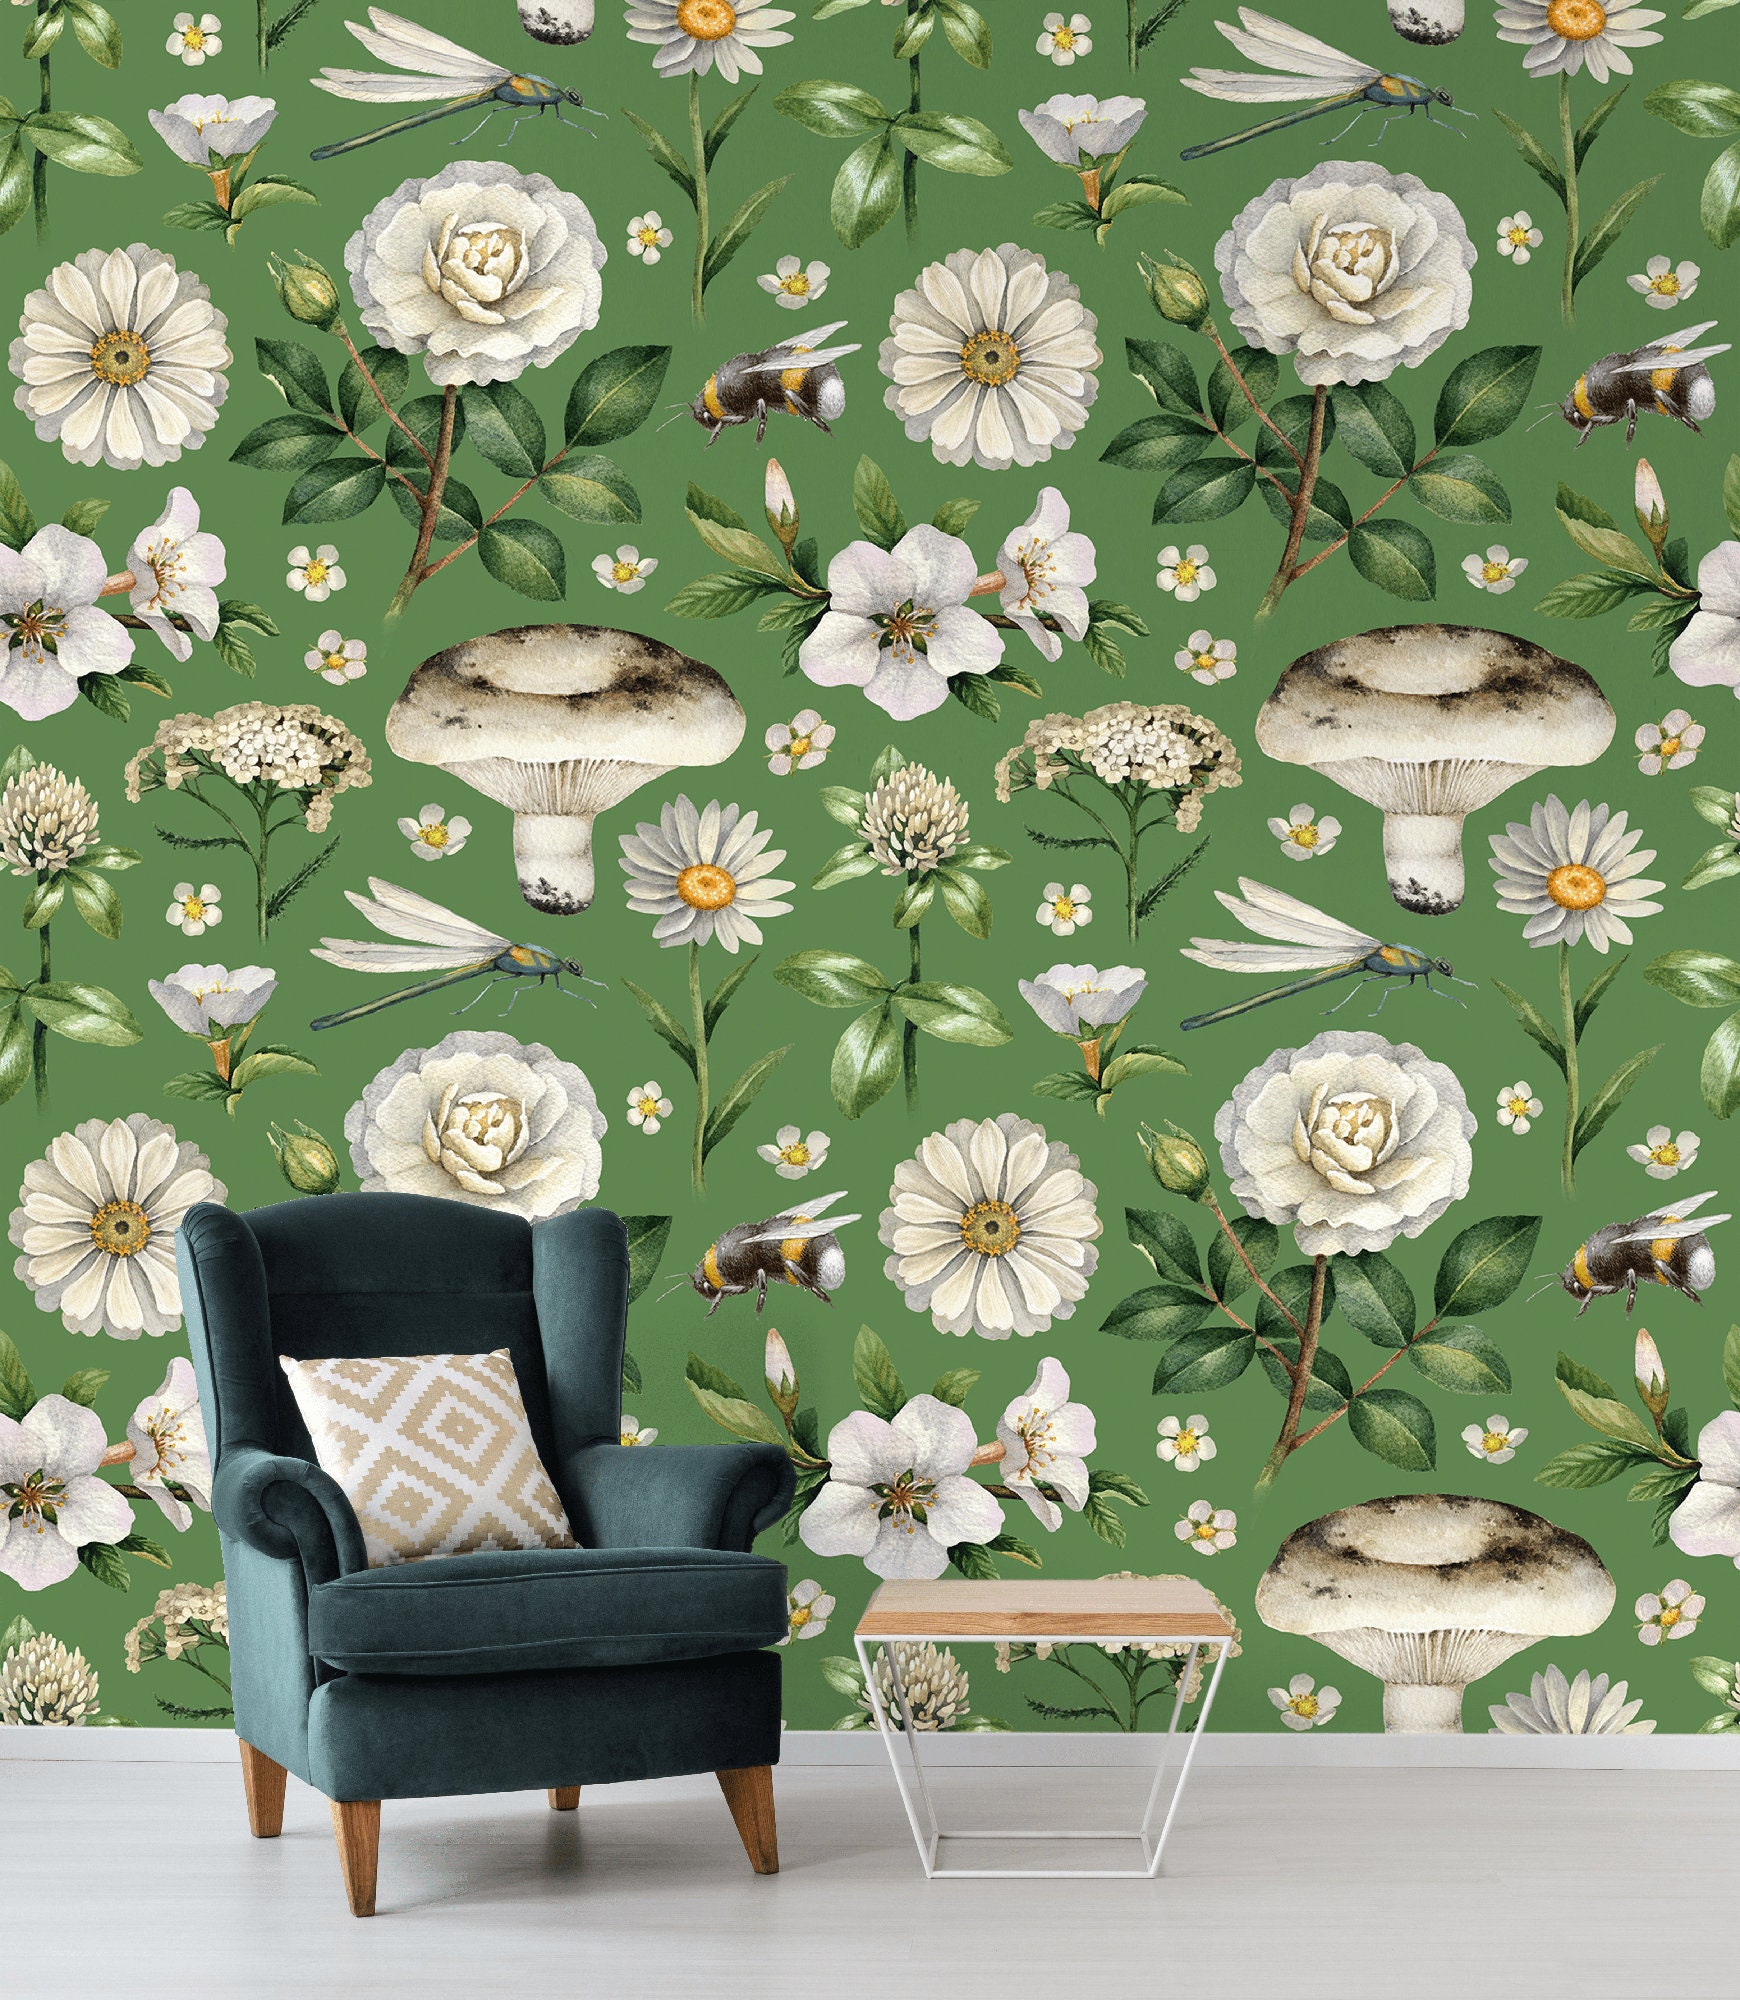 Grey Leaf Wallpaper Peel and Stick Wallpaper Vintage Floral Wall Paper  Removable Self Adhesive Wallpaper Botanical Contact Paper for Cabinets  Shelf Bedroom Bathroom Waterproof 15.7x78.7 Vinyl Roll 